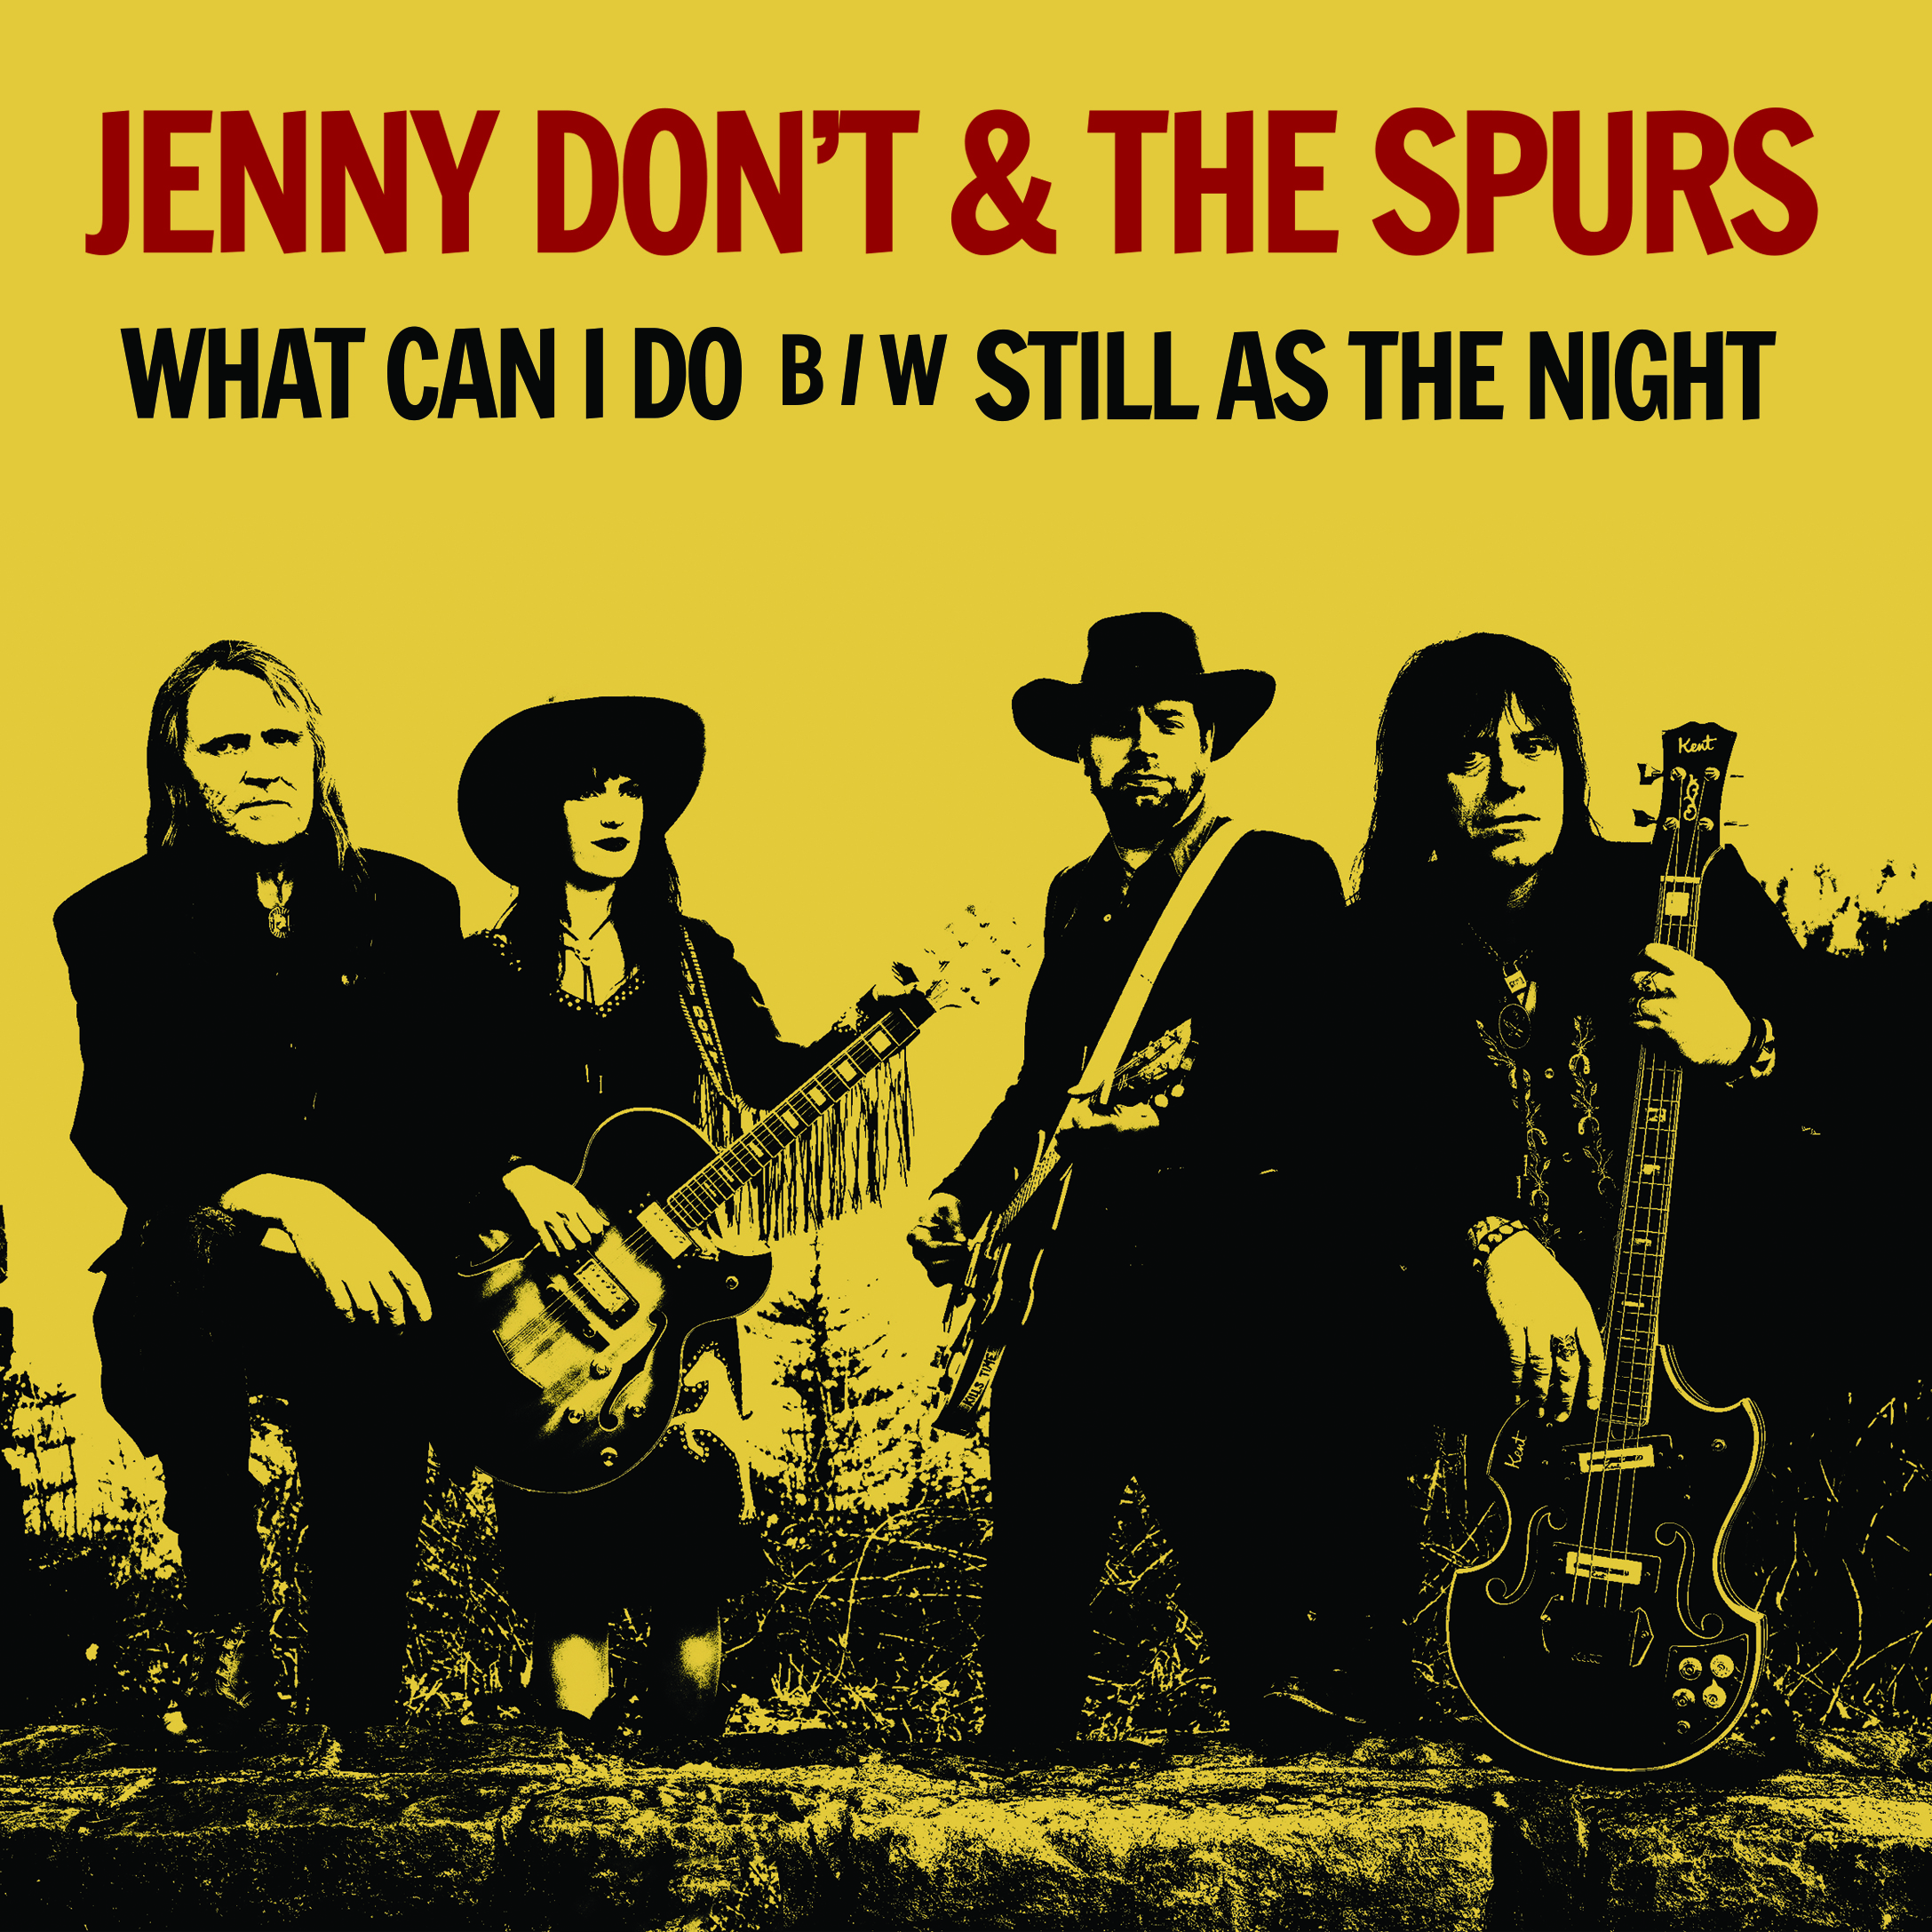 Jenny Don't & The Spurs- What Can I Do B/w Still As The Night 7" [COLOR VINYL]